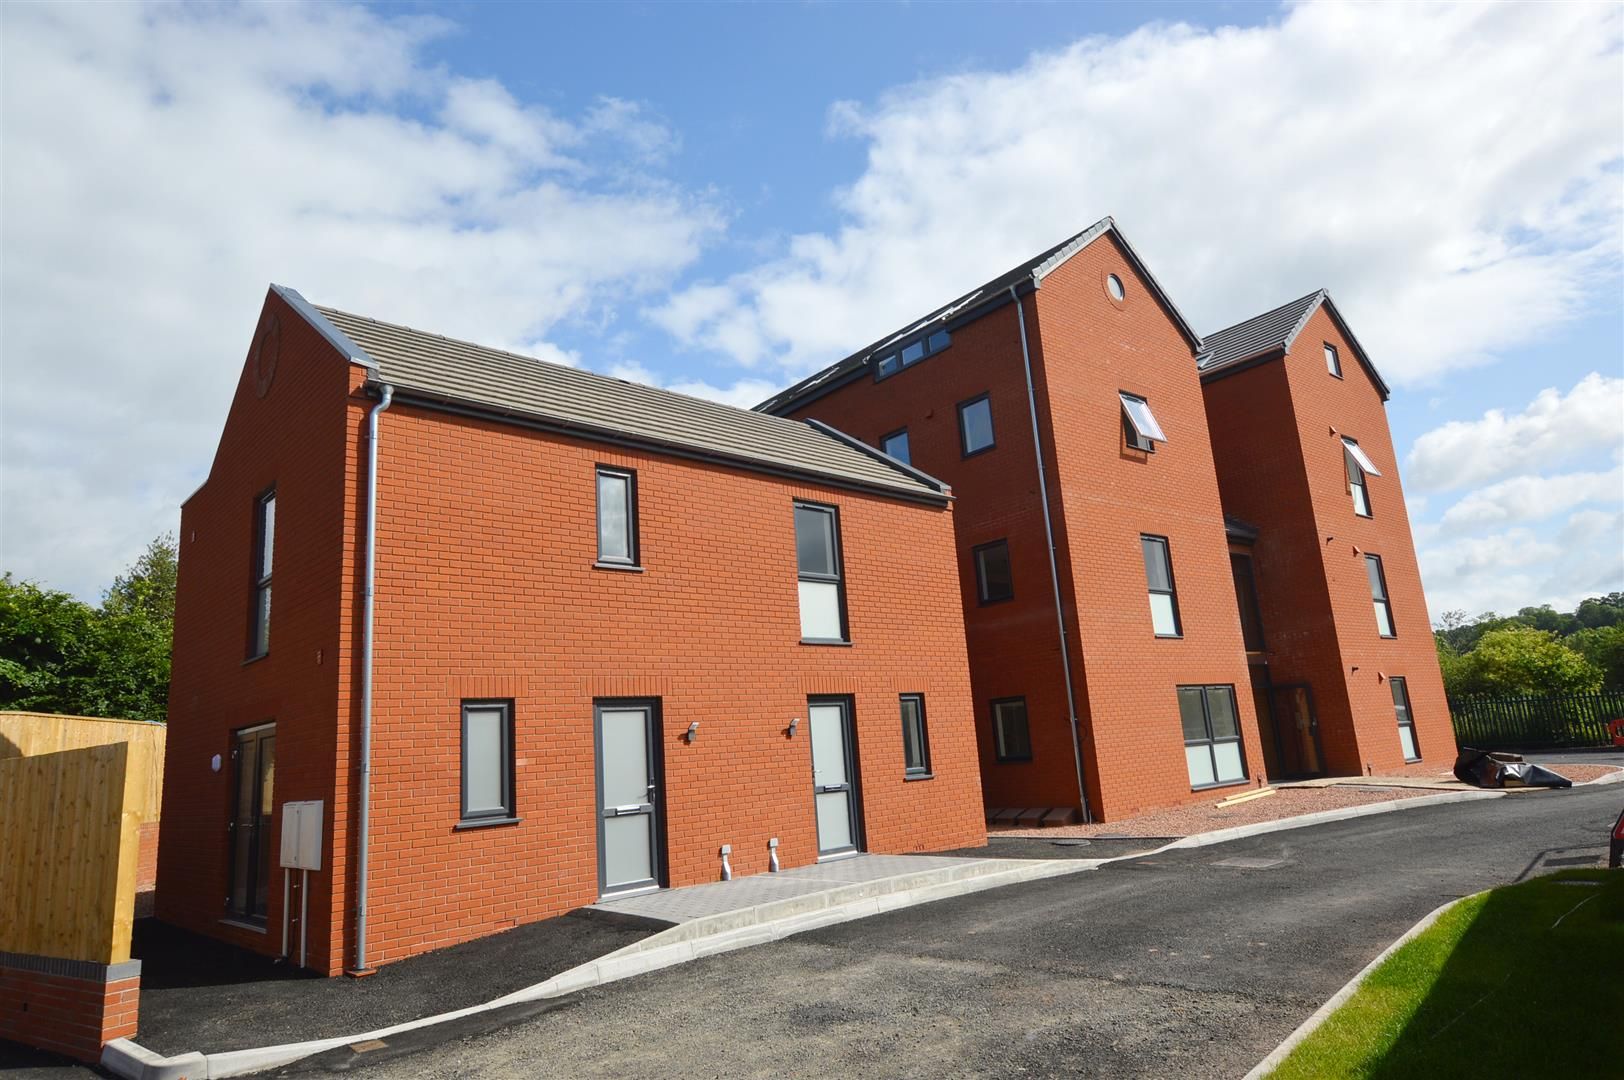 1 bed apartment for sale in Leominster 1